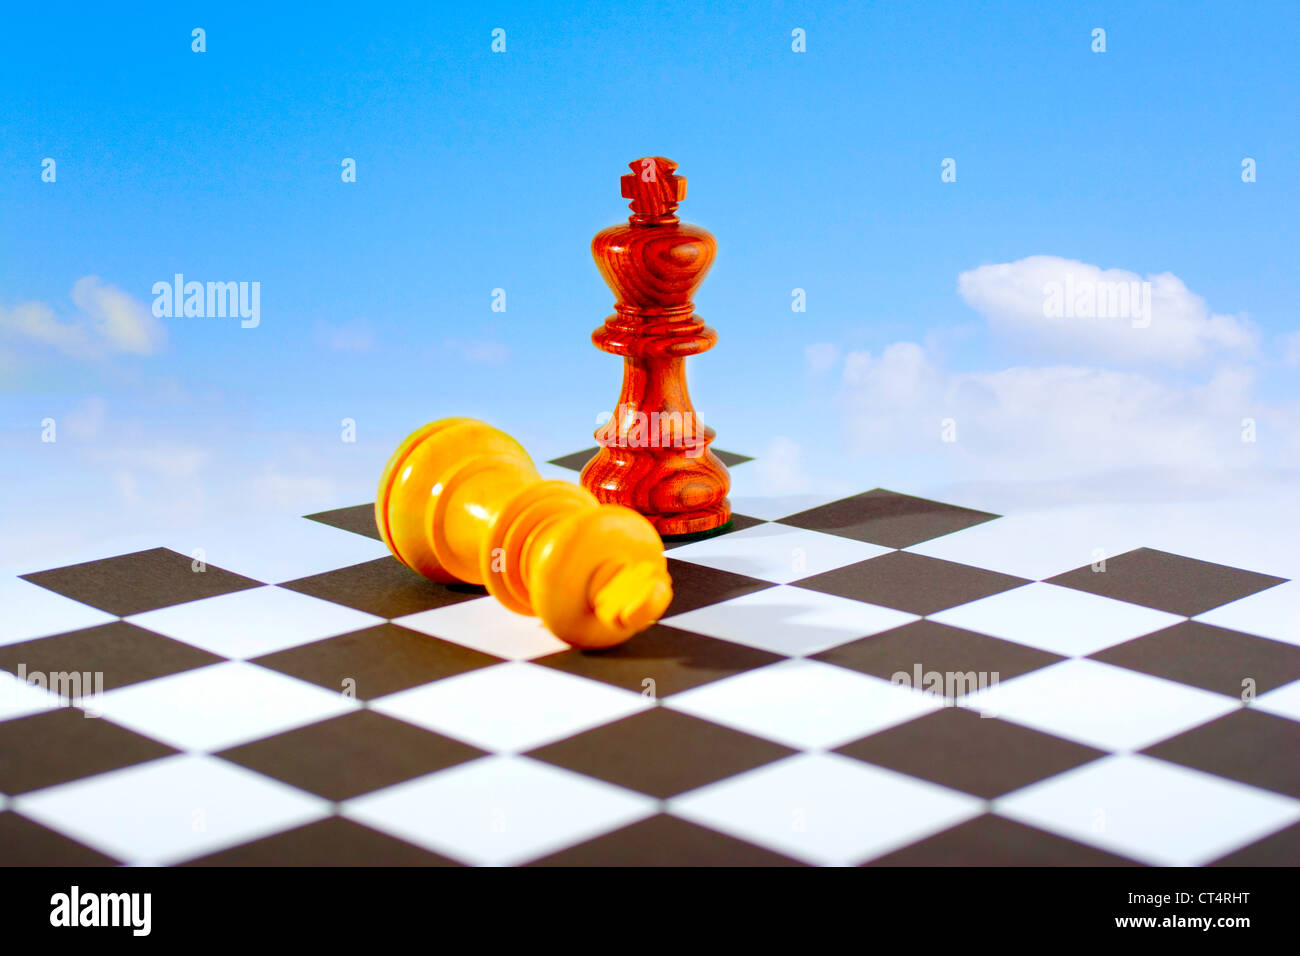 chess board seen close up with depth of field effect - 3D rendering Stock  Photo - Alamy